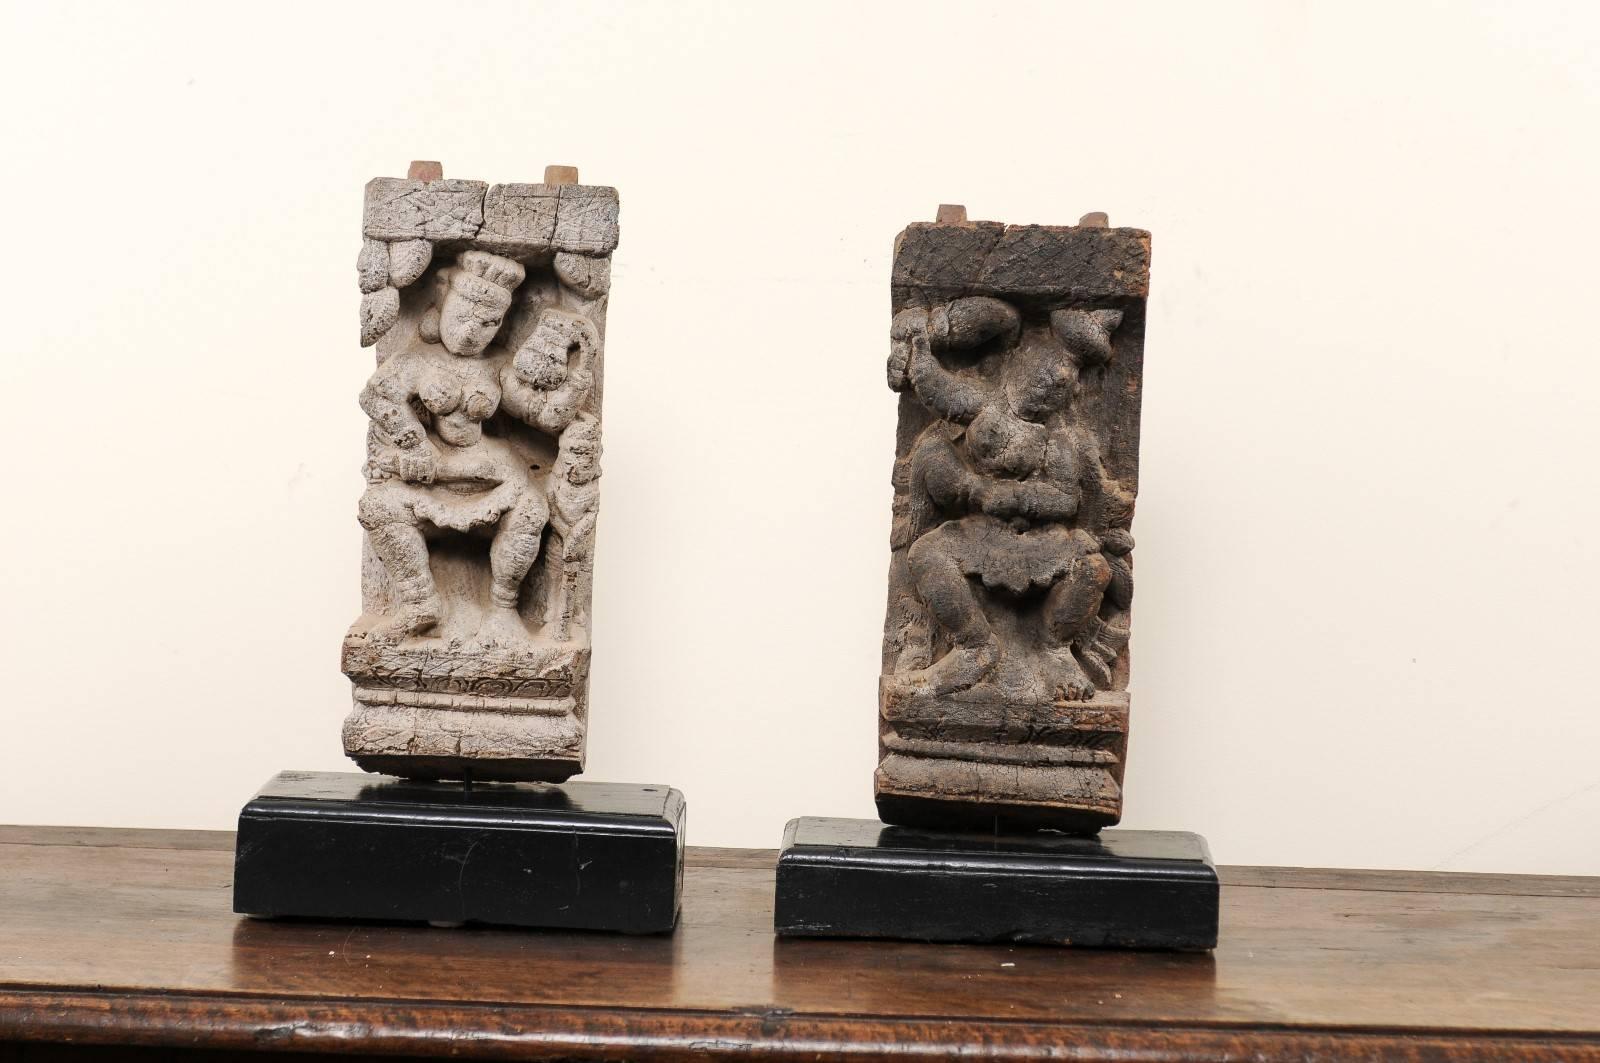 A pair of 19th century Hindu temple fragments. This pair of antique fragments were elements of a section of hand-carved wood frieze, within a temple in India. They have each been mounted on a custom-made, rectangular-shaped, black painted wood